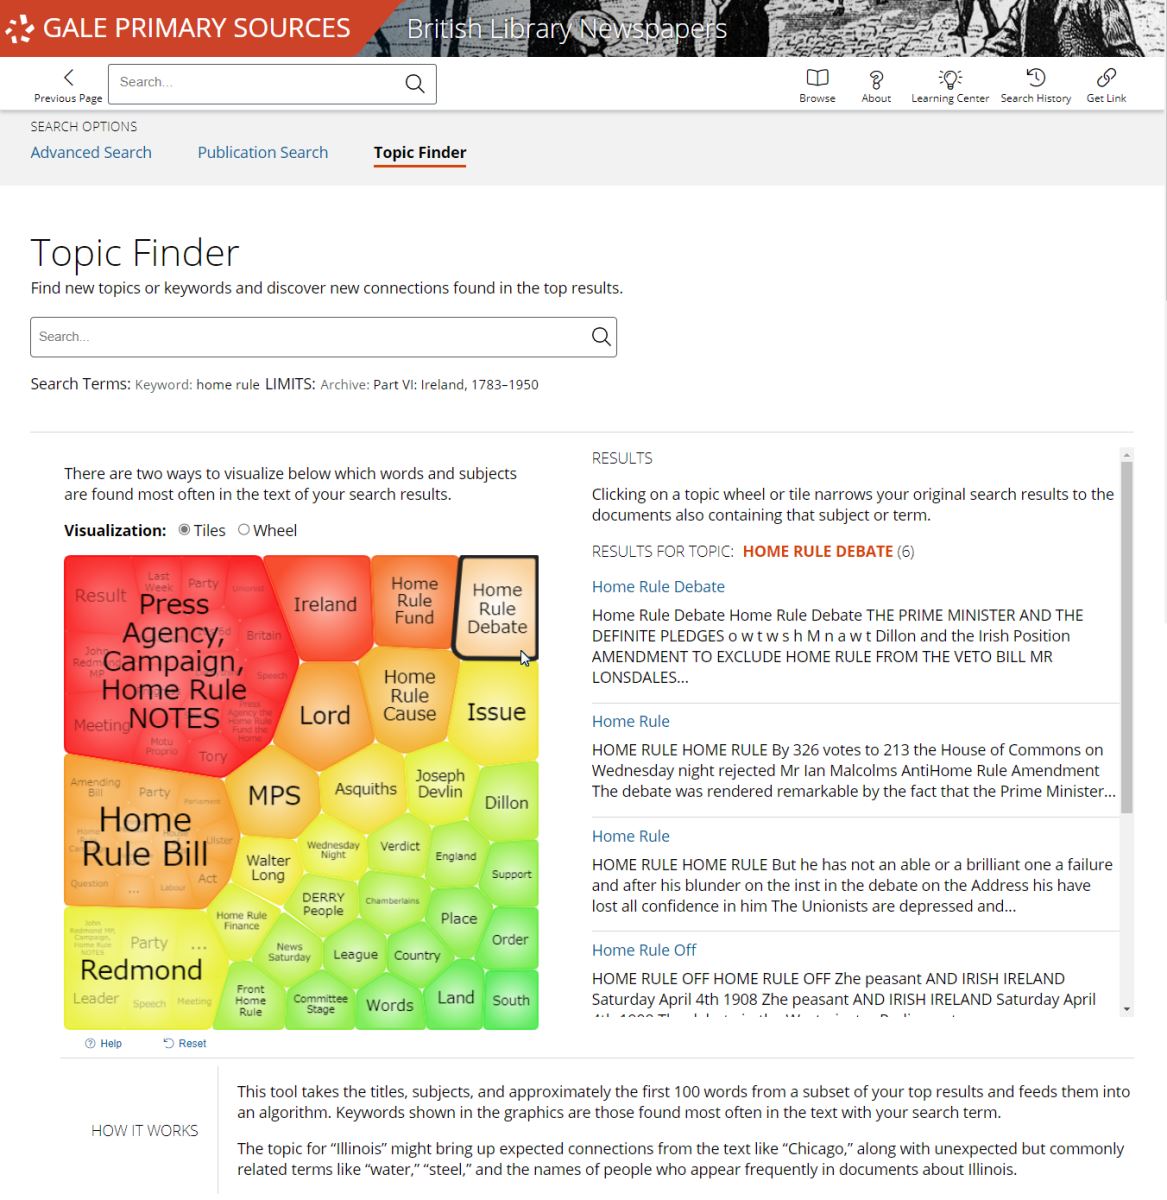 Topic Finder